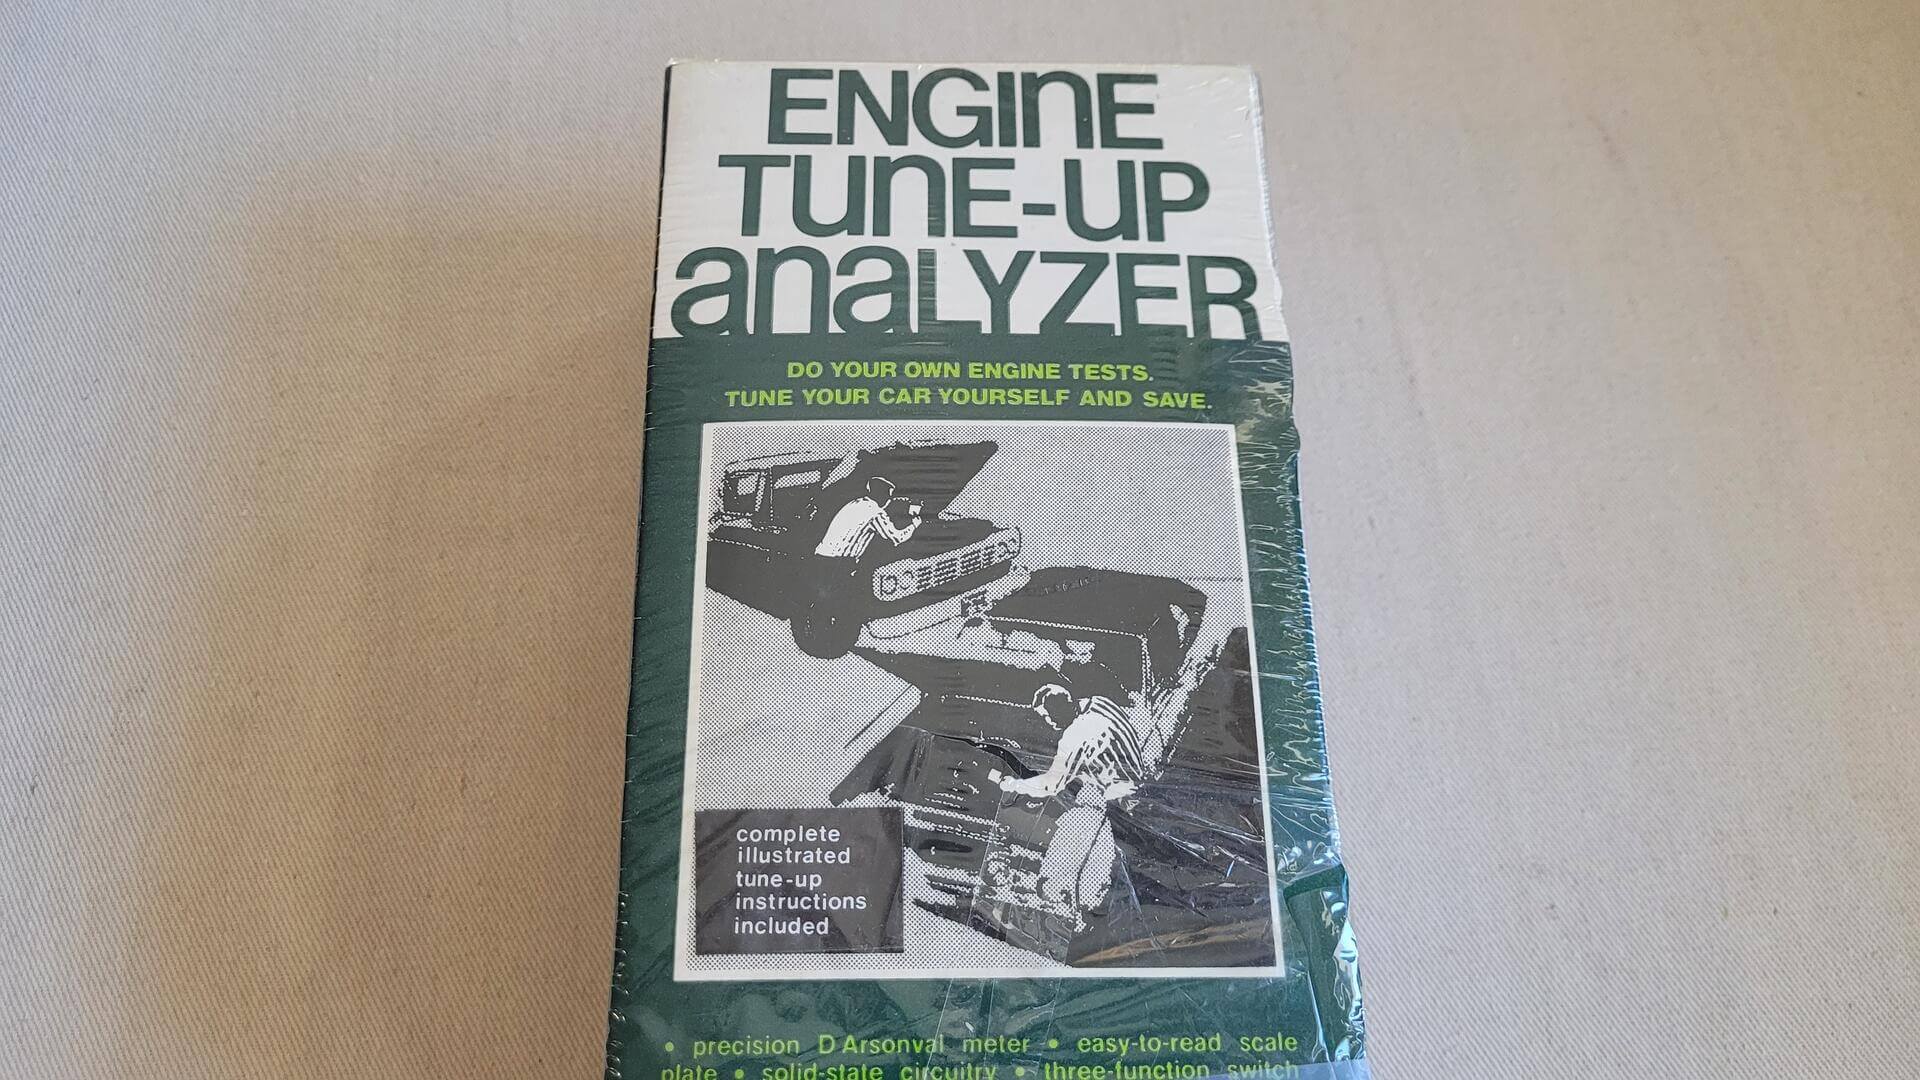 Rare vintage hand held Micronta Engine Tune-Up Analyzer accurate metering of RPM, volts & cam dwell for 4,6, and 8 cylinder engines 12 volt positive or negative ground cat. no. 22-1632. Retro collectible automotive testing equipment